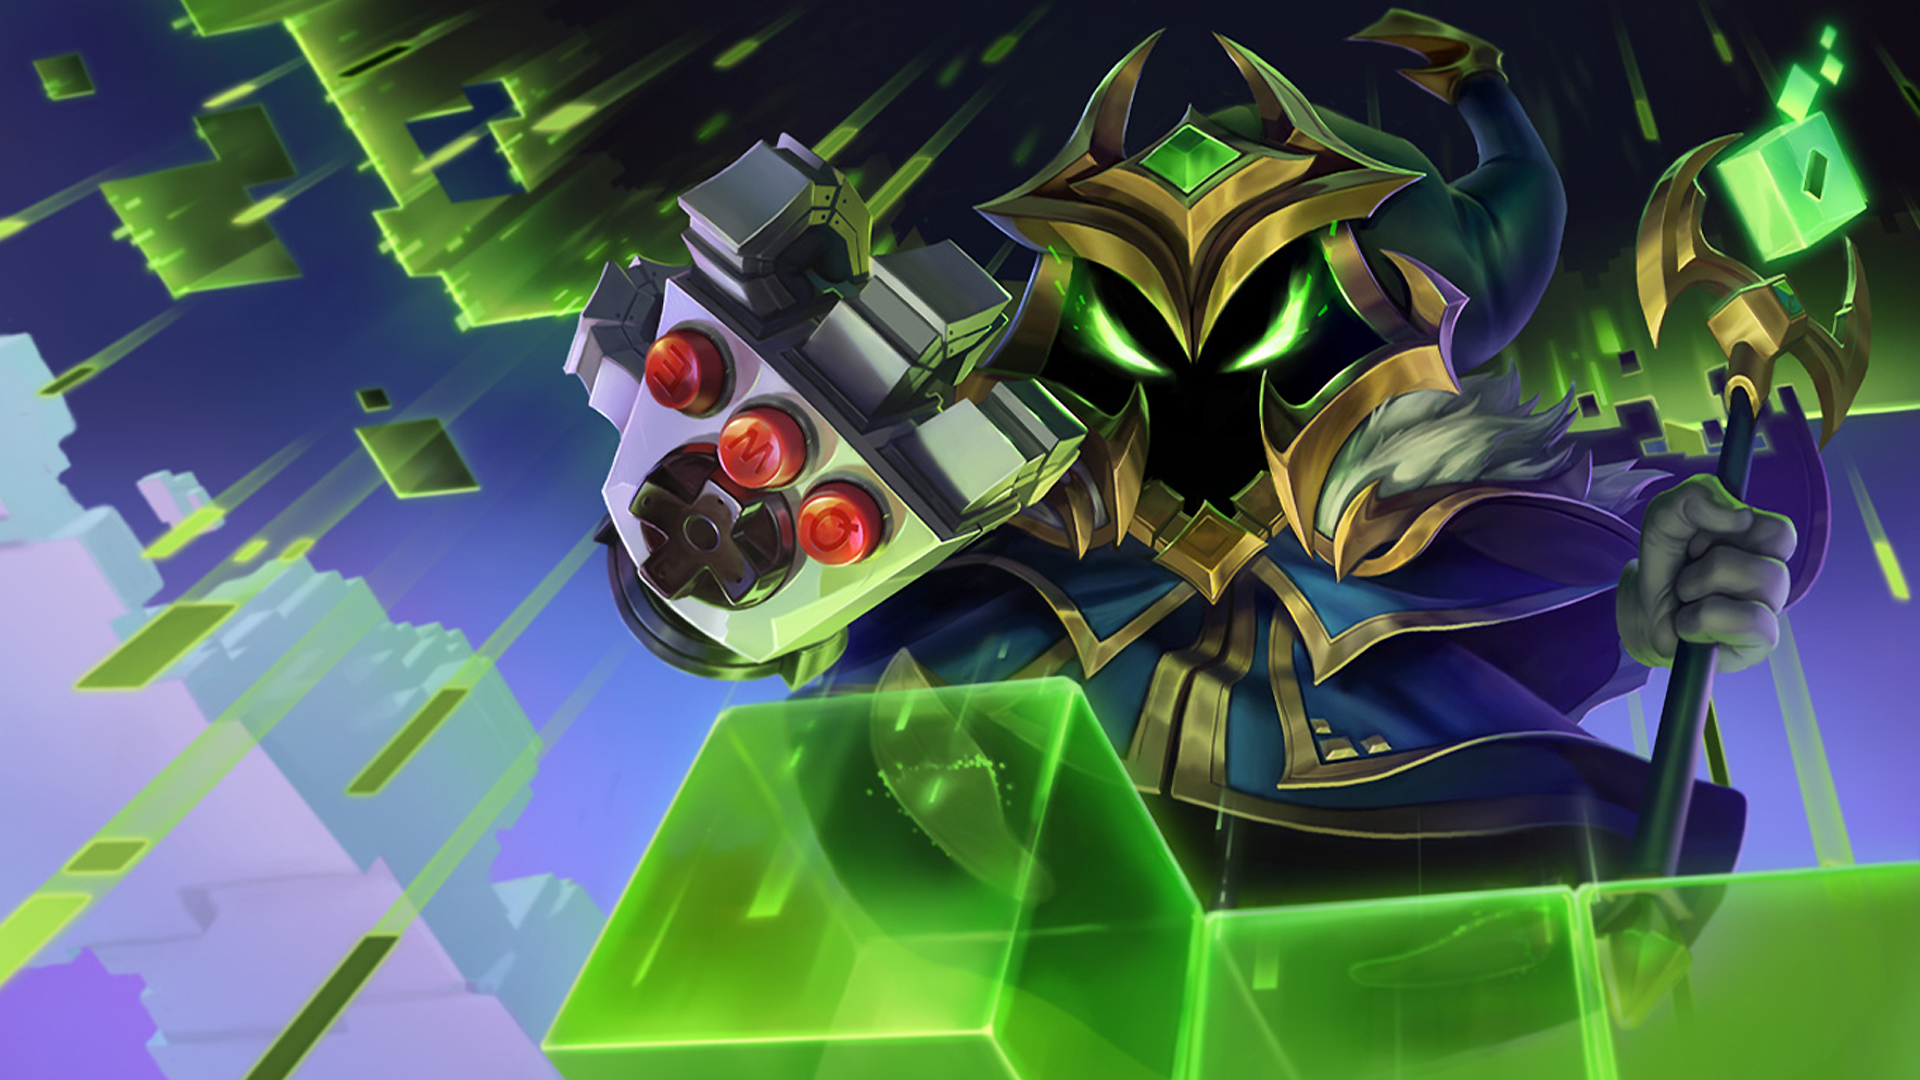 veigar wallpaper,graphic design,adventure game,games,fictional character,illustration